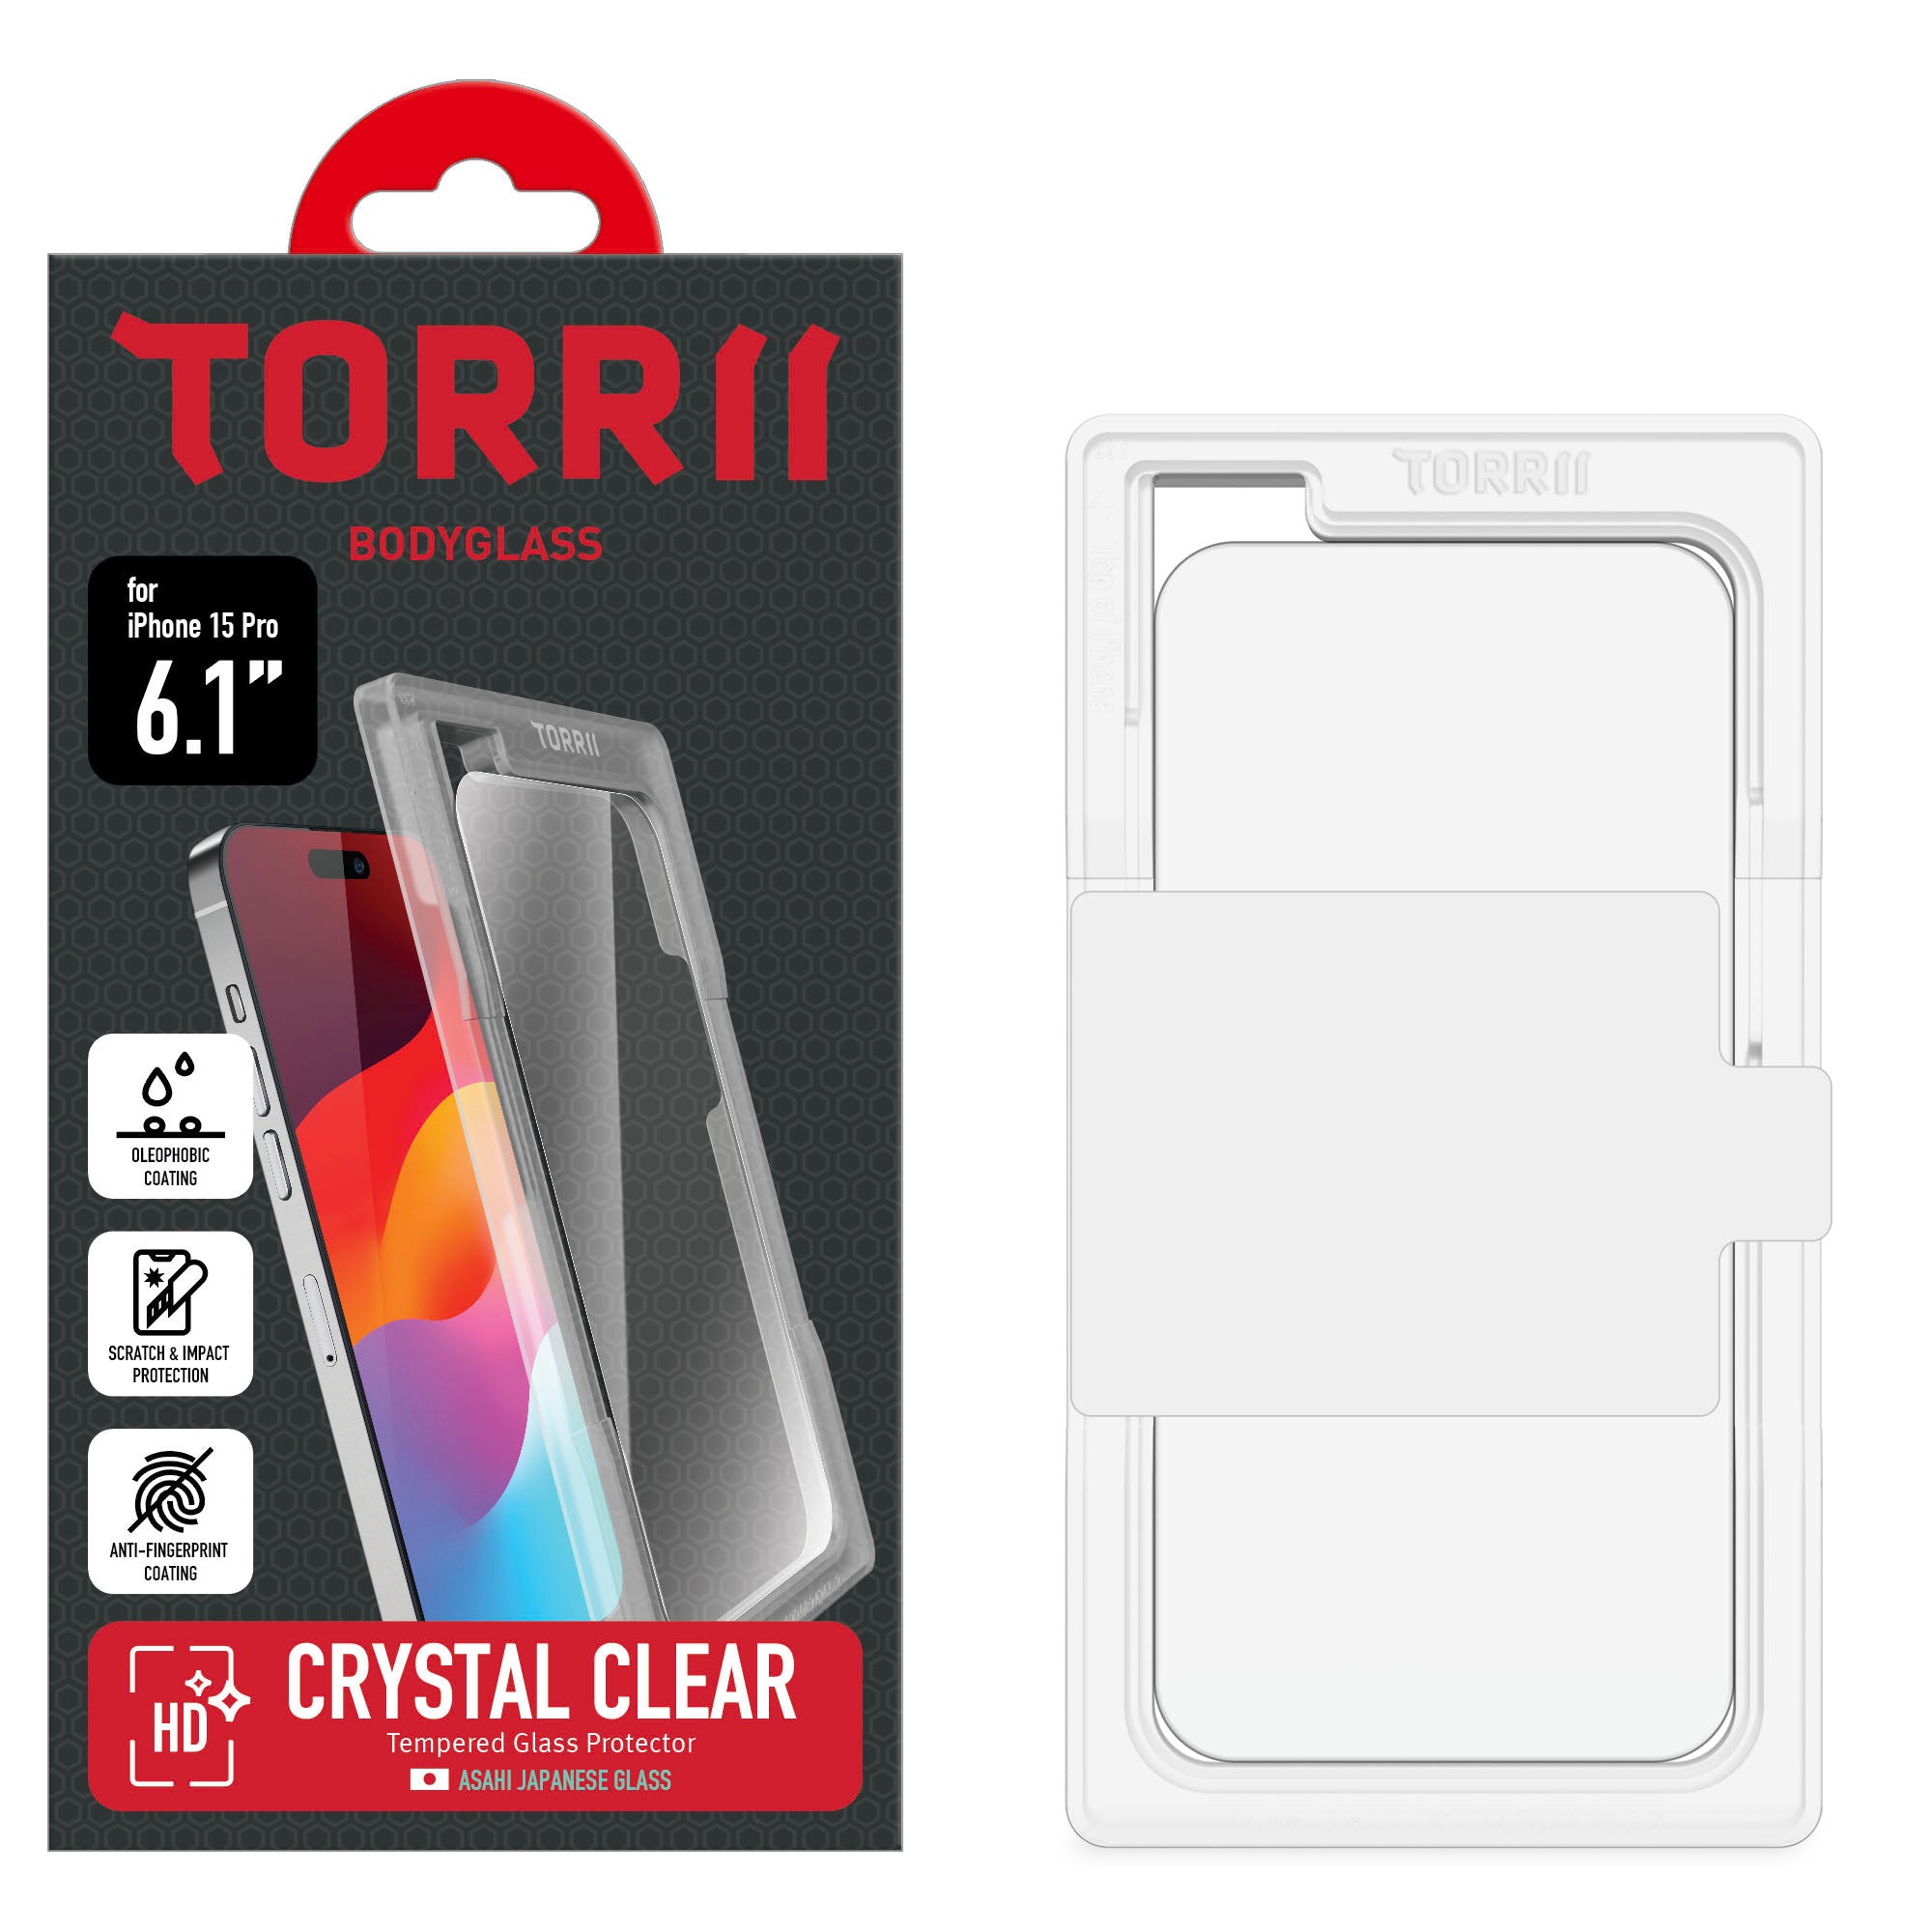 Torrii Bodyglass Screen Protector For iPhone 15 Pro – Clear